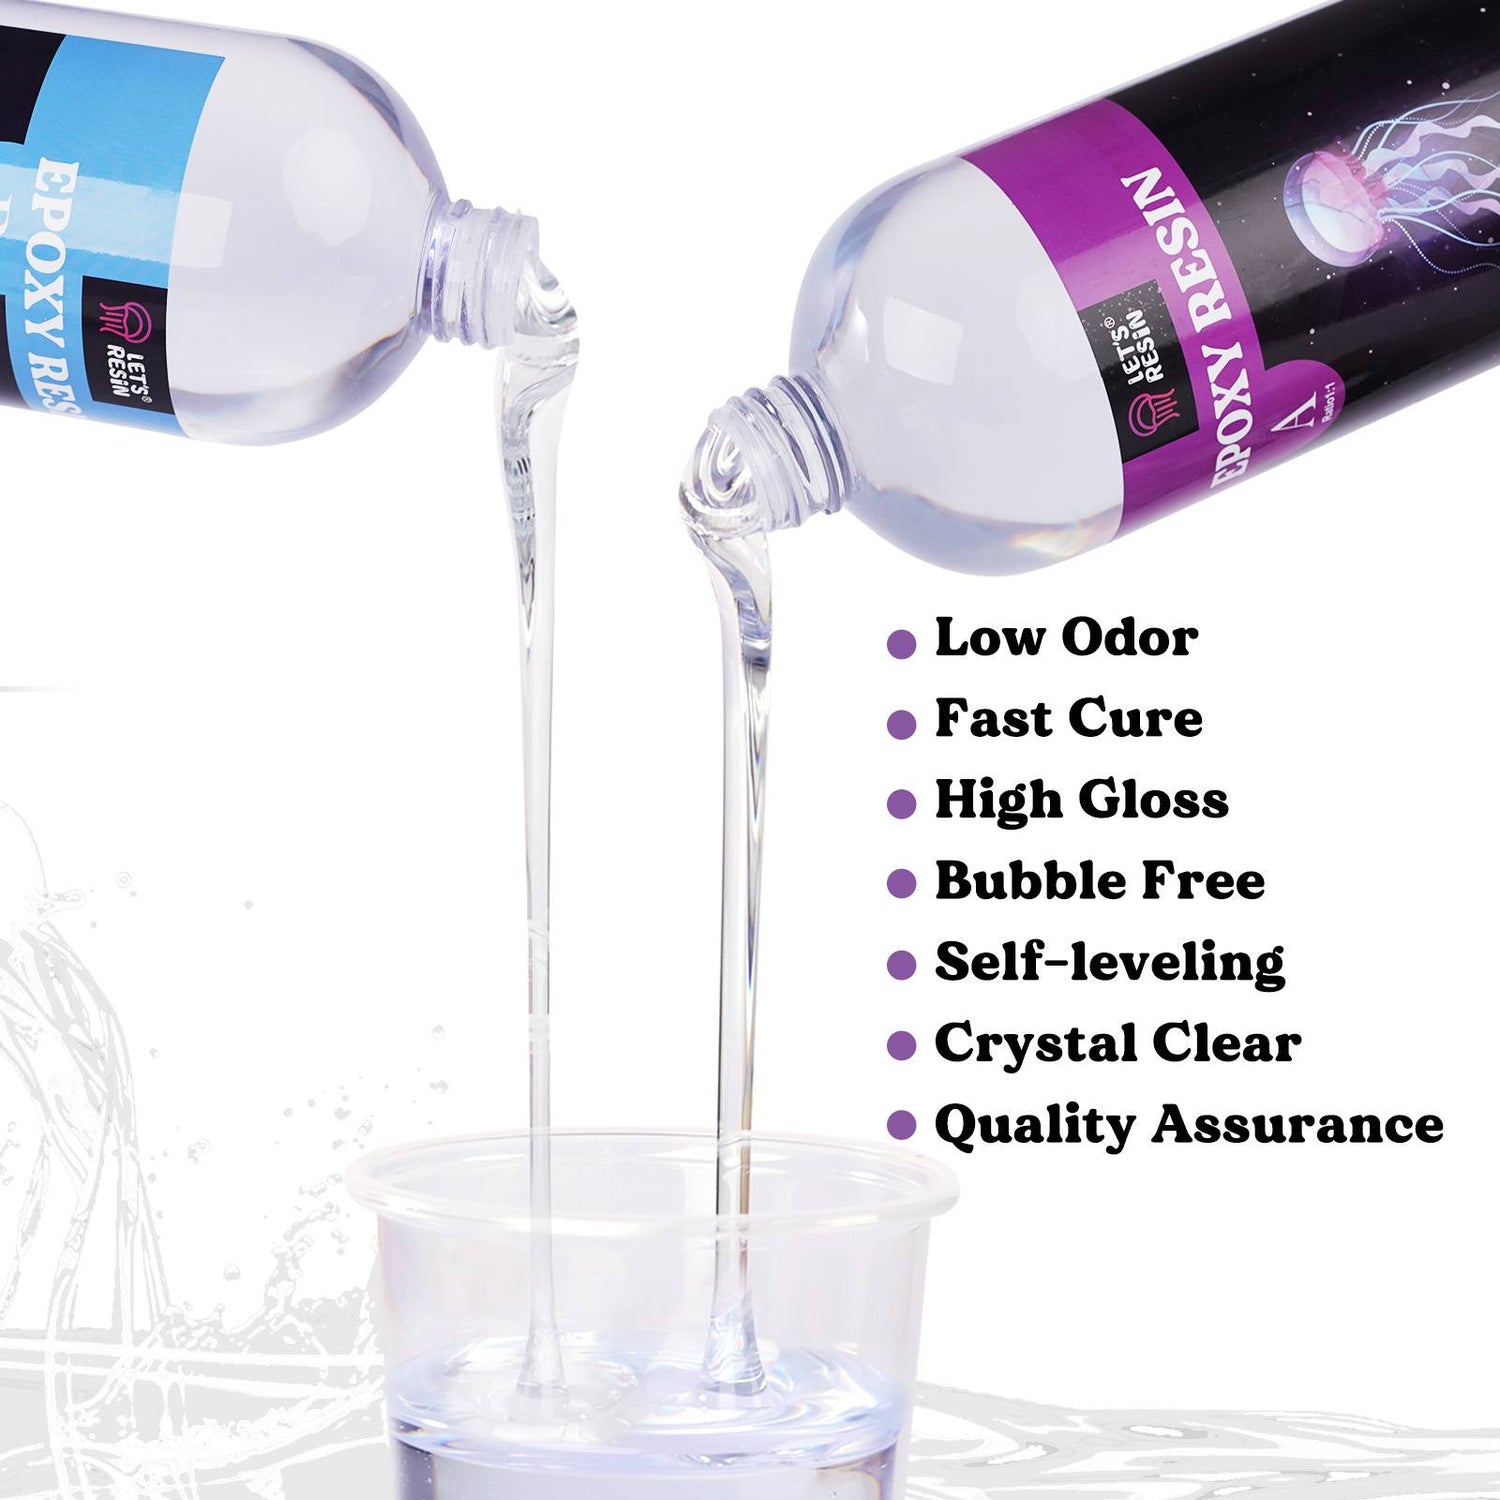  LET'S RESIN Epoxy Resin, 23oz Bubble Free Epoxy Resin, Crystal  Clear Epoxy Resin for Jewelry,Art,Tumblers,Casting Resin with Resin Cup,  Stir Stick : Arts, Crafts & Sewing